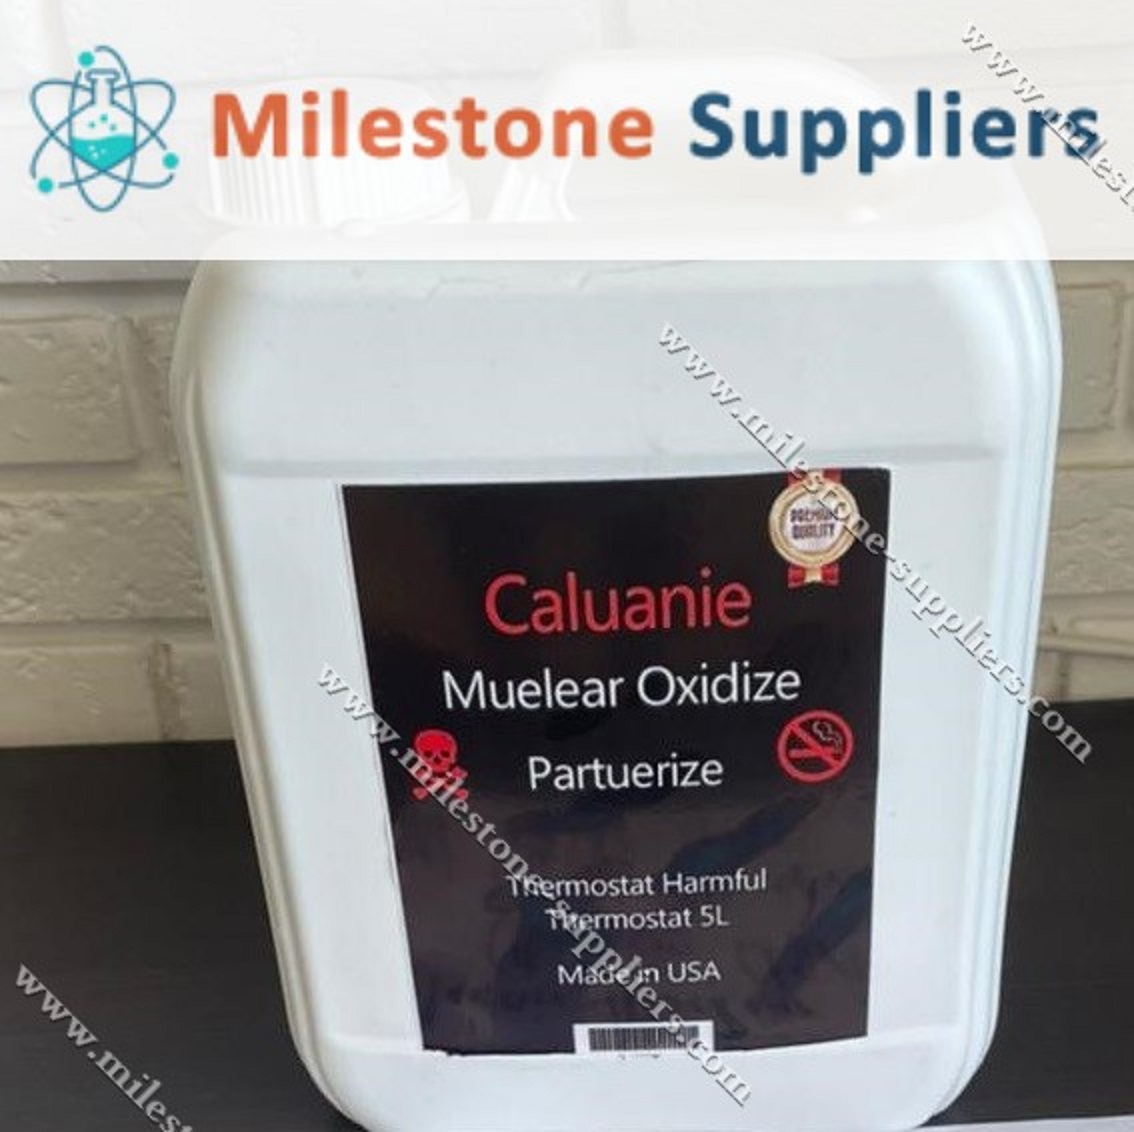 Buy Quality Caluanie Muelear Oxidize used for crushing precious metals and semiprecious